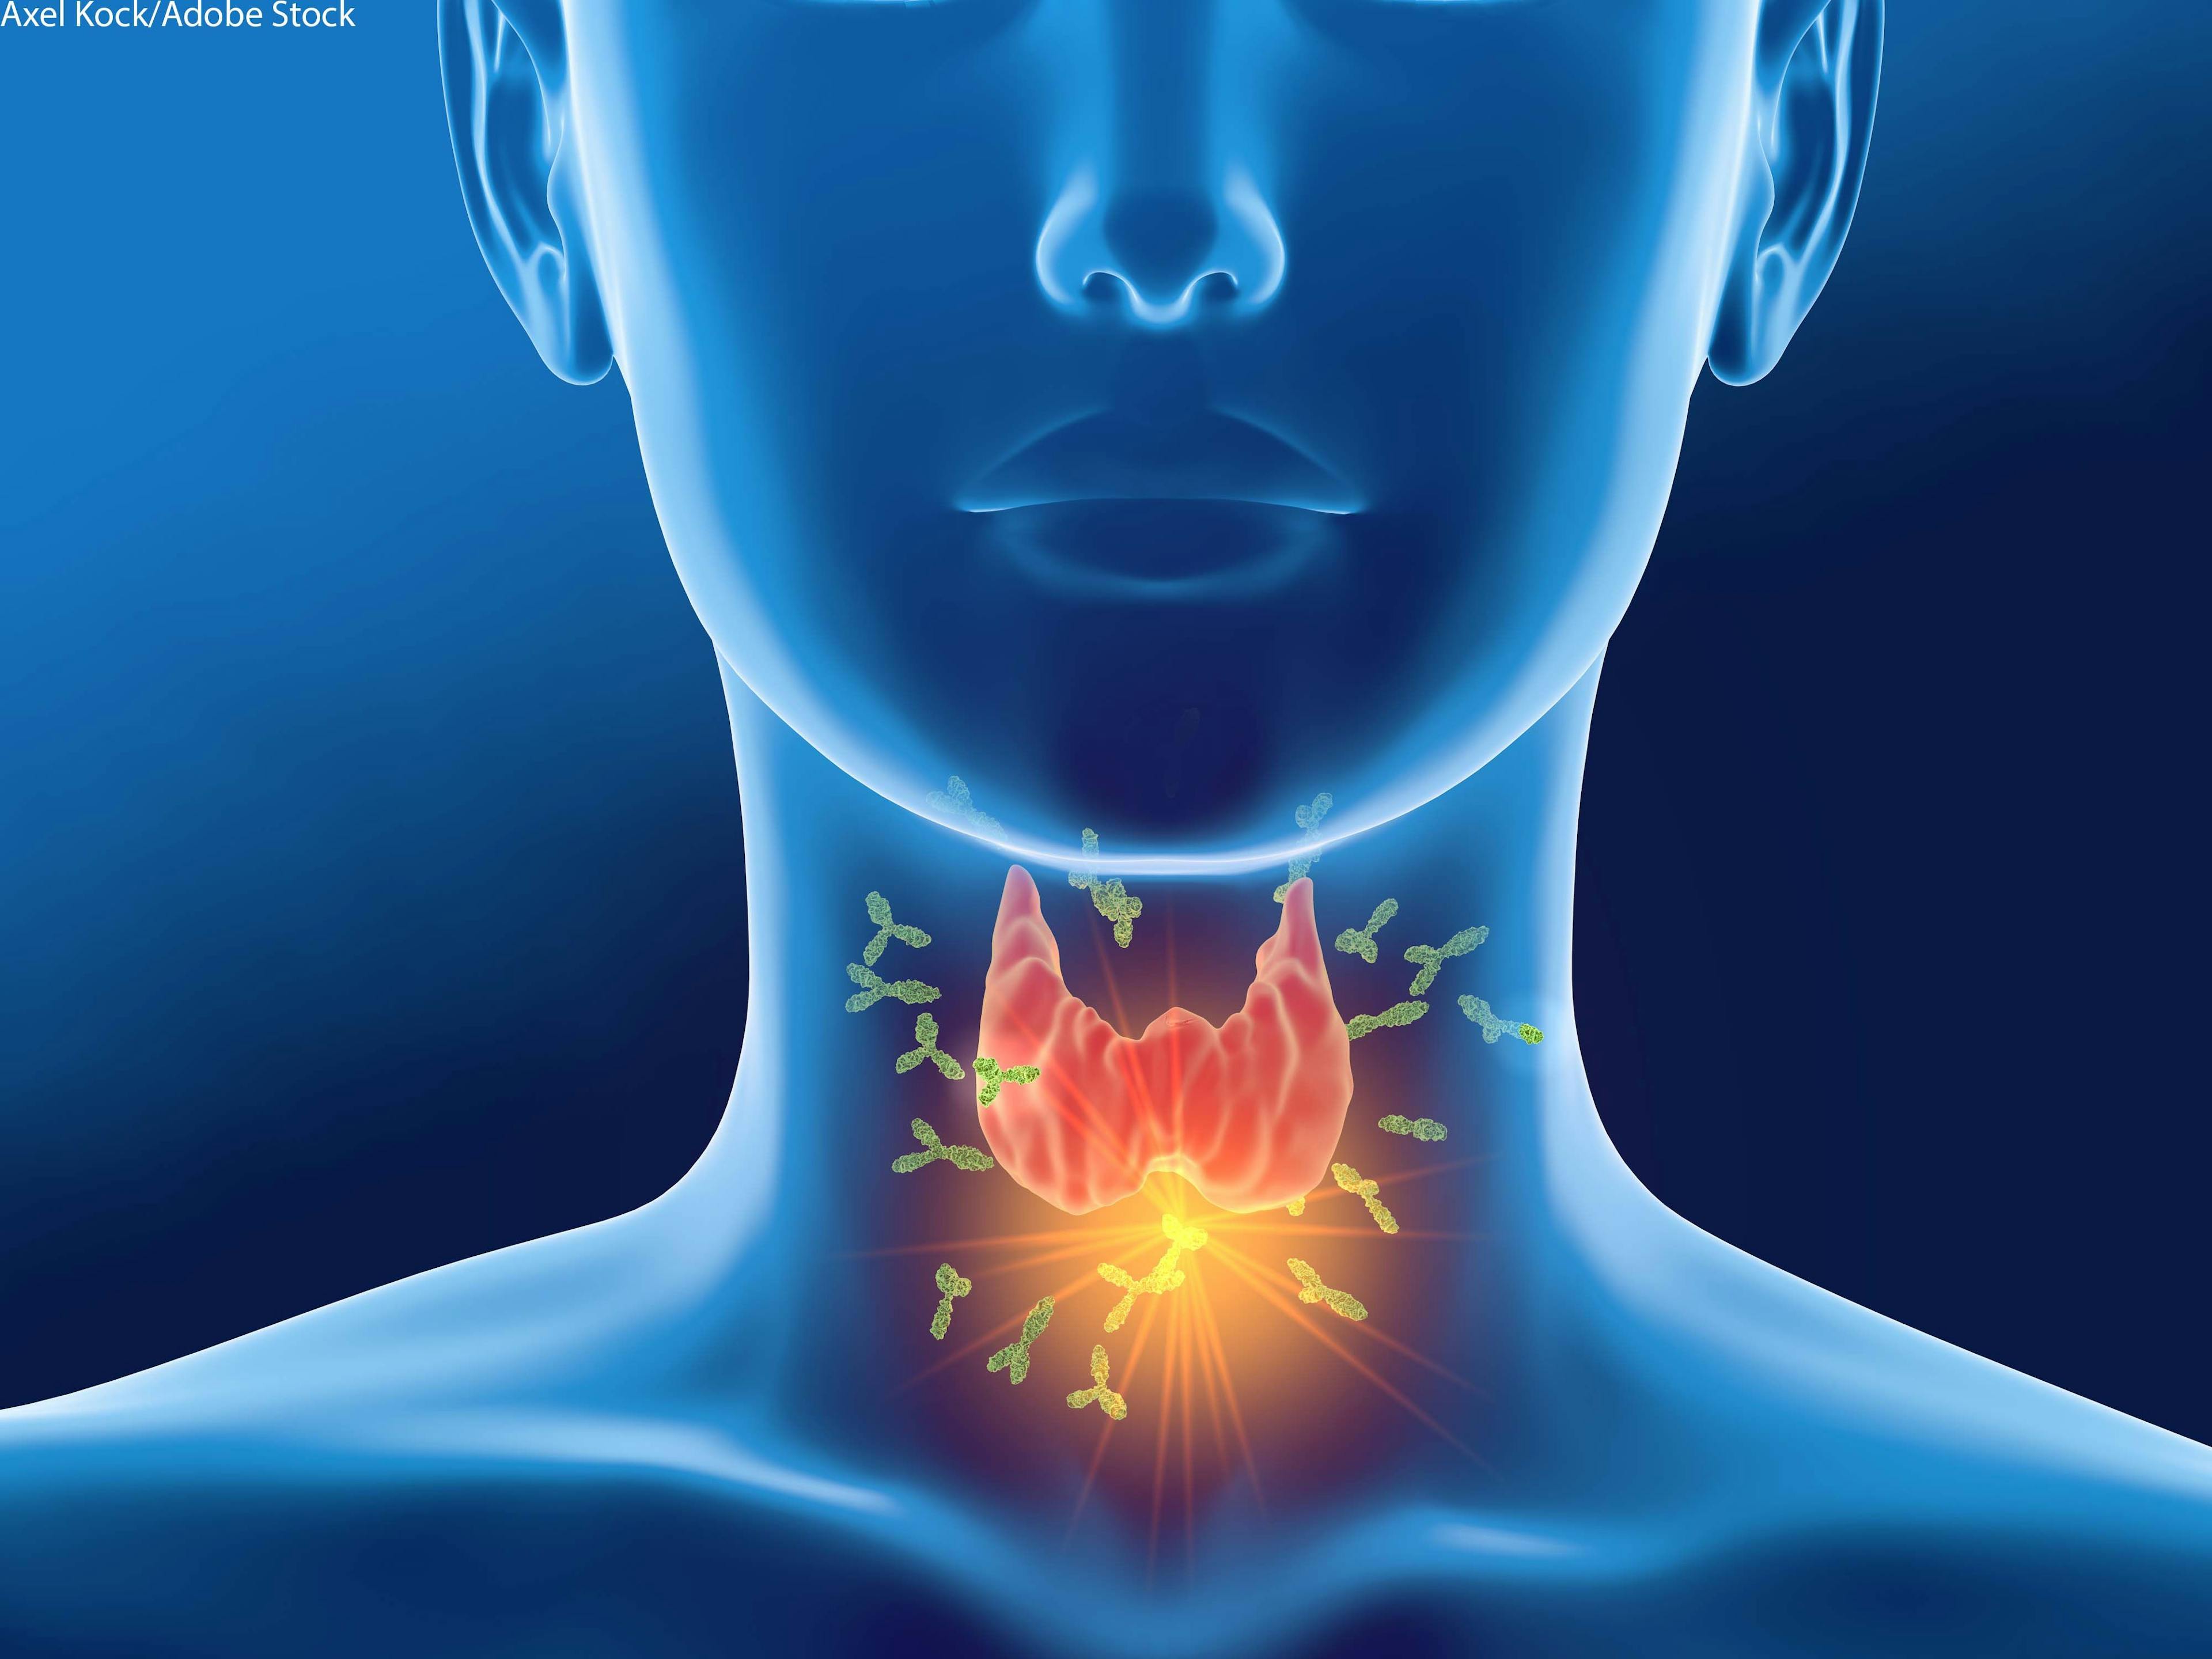 "Today, TOETVA is increasingly being applied in many thyroid surgery [centers] worldwide due to its many advantages, such as the ability to access both thyroid lobes, remove central neck lymph nodes and have ideal cosmetic results by leaving no scar on the skin," according to the study authors.